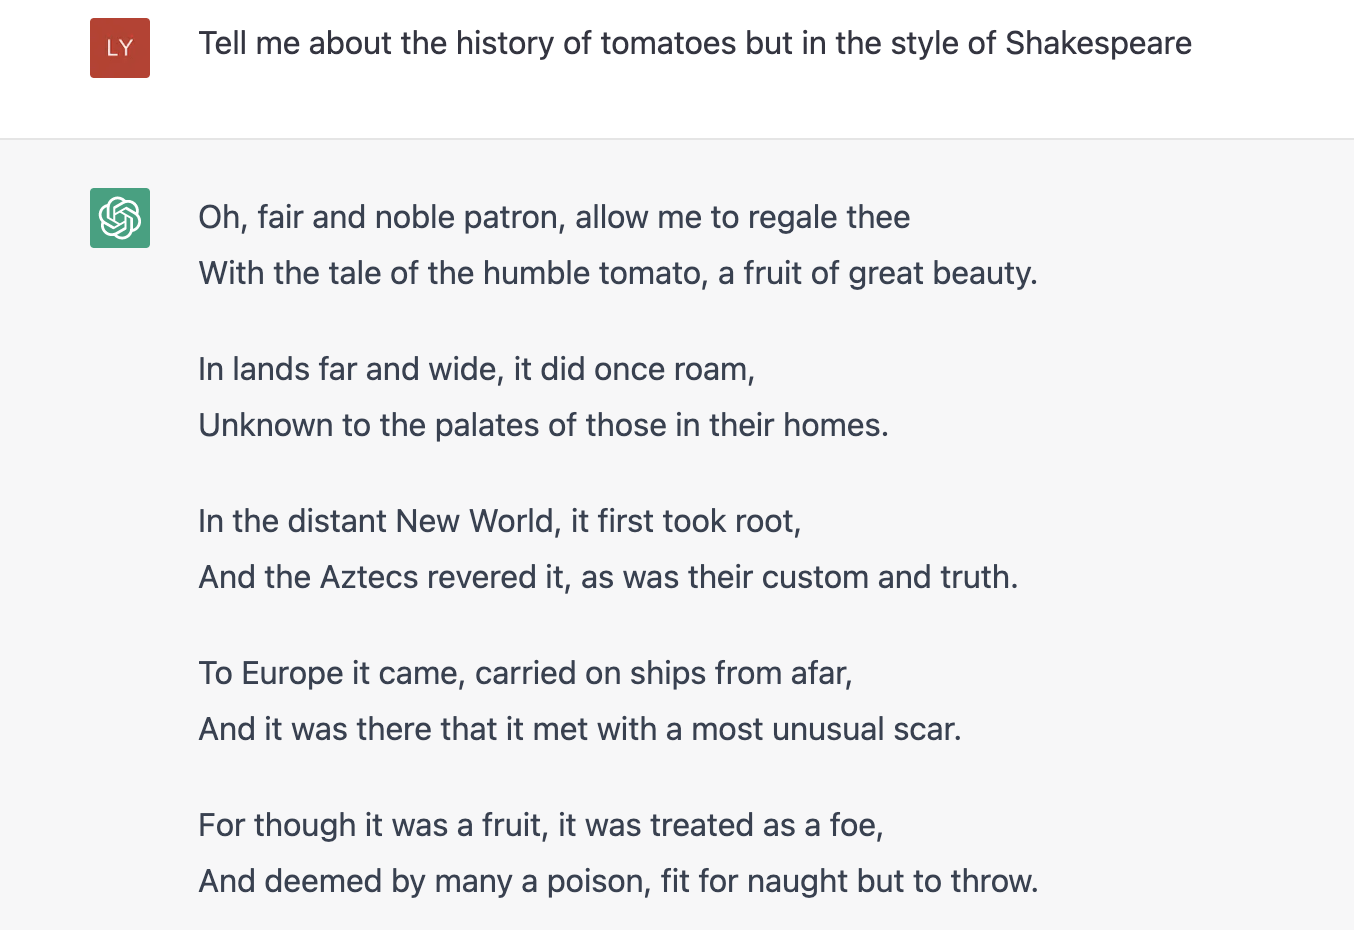 asking ChatGPT the history of tomatoes in the style of Shakespeare 